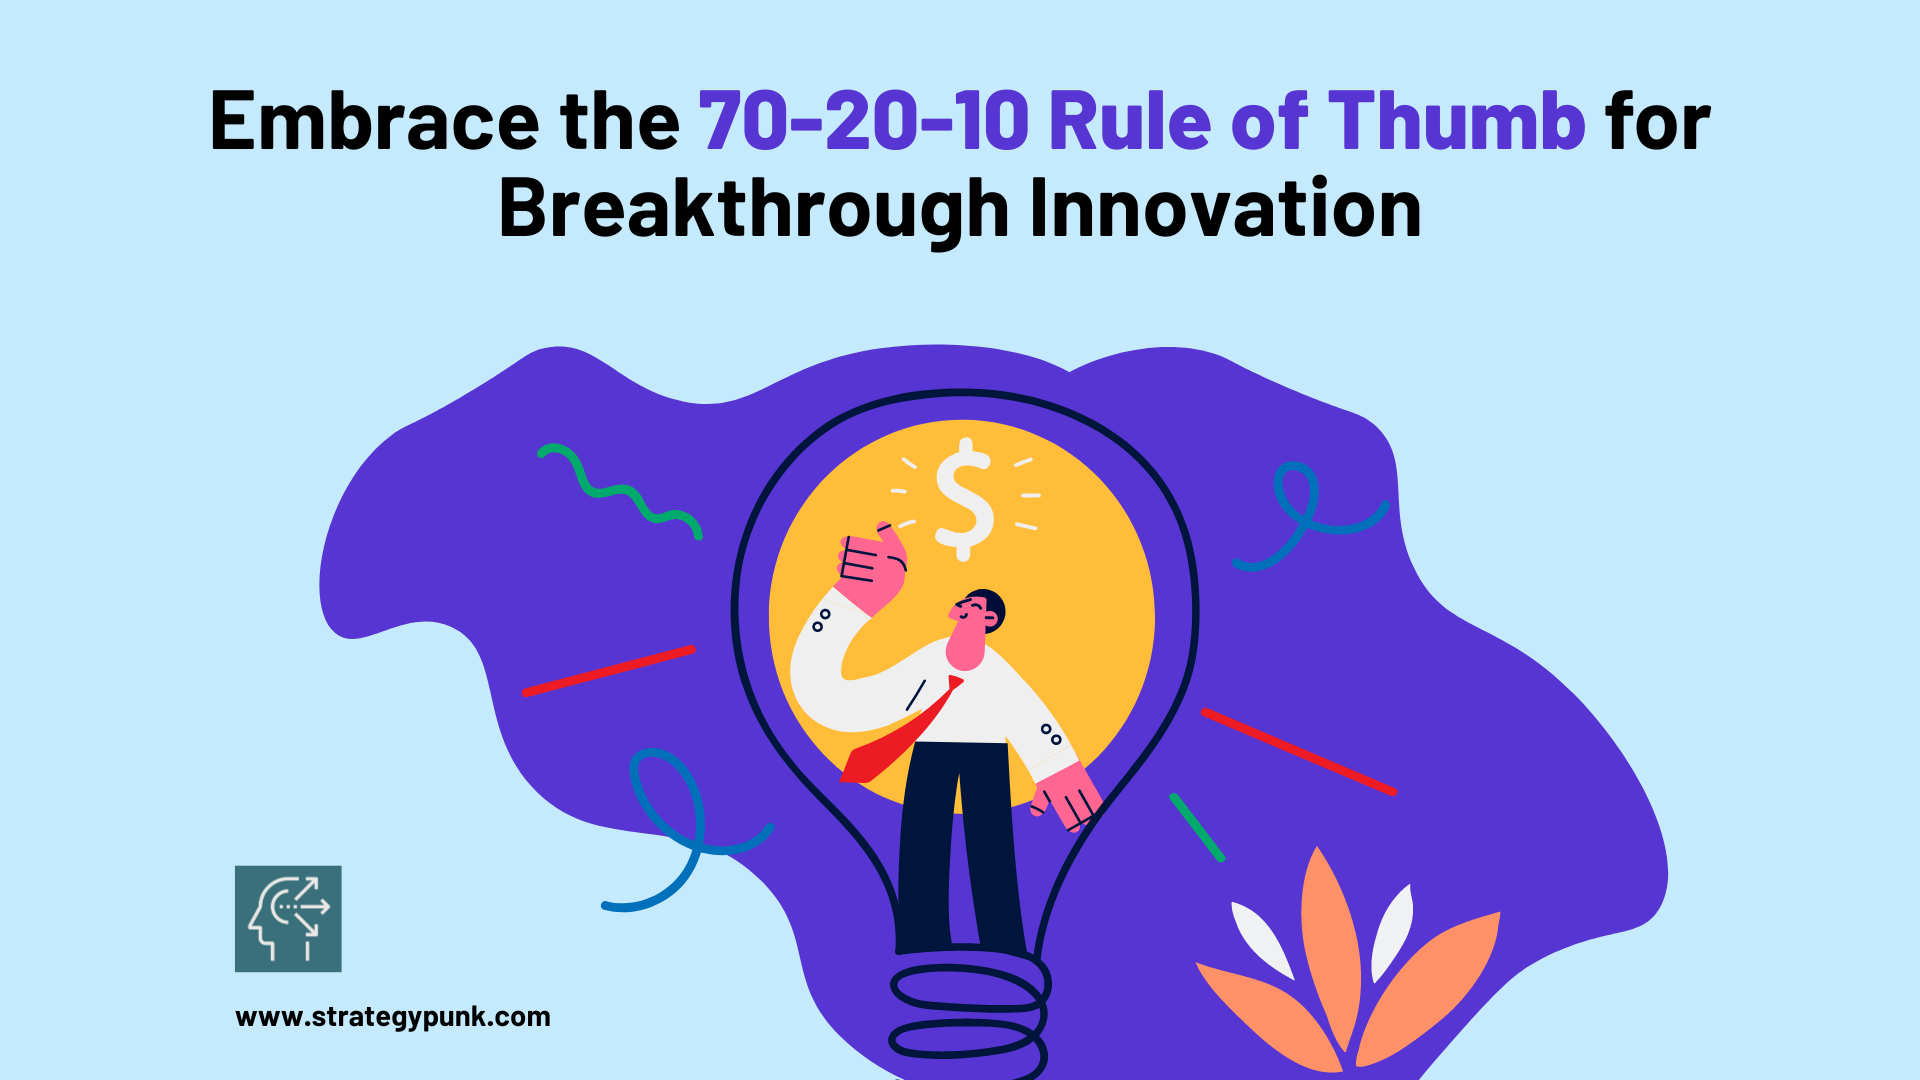 Embrace the 70-20-10 Rule of Thumb for Breakthrough Innovation